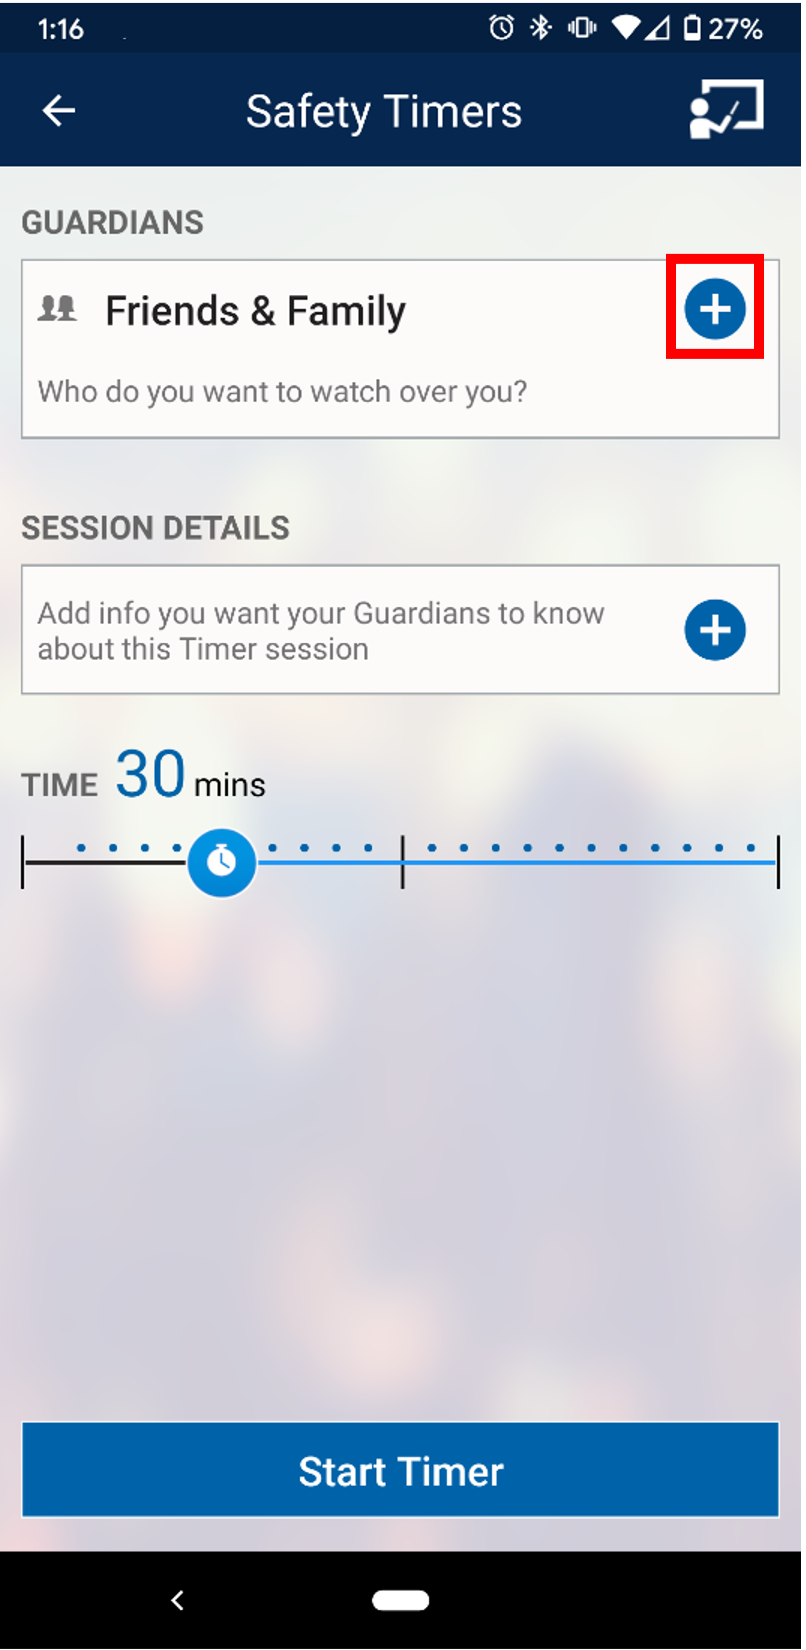 Guardian app add guardians for safety timer feature